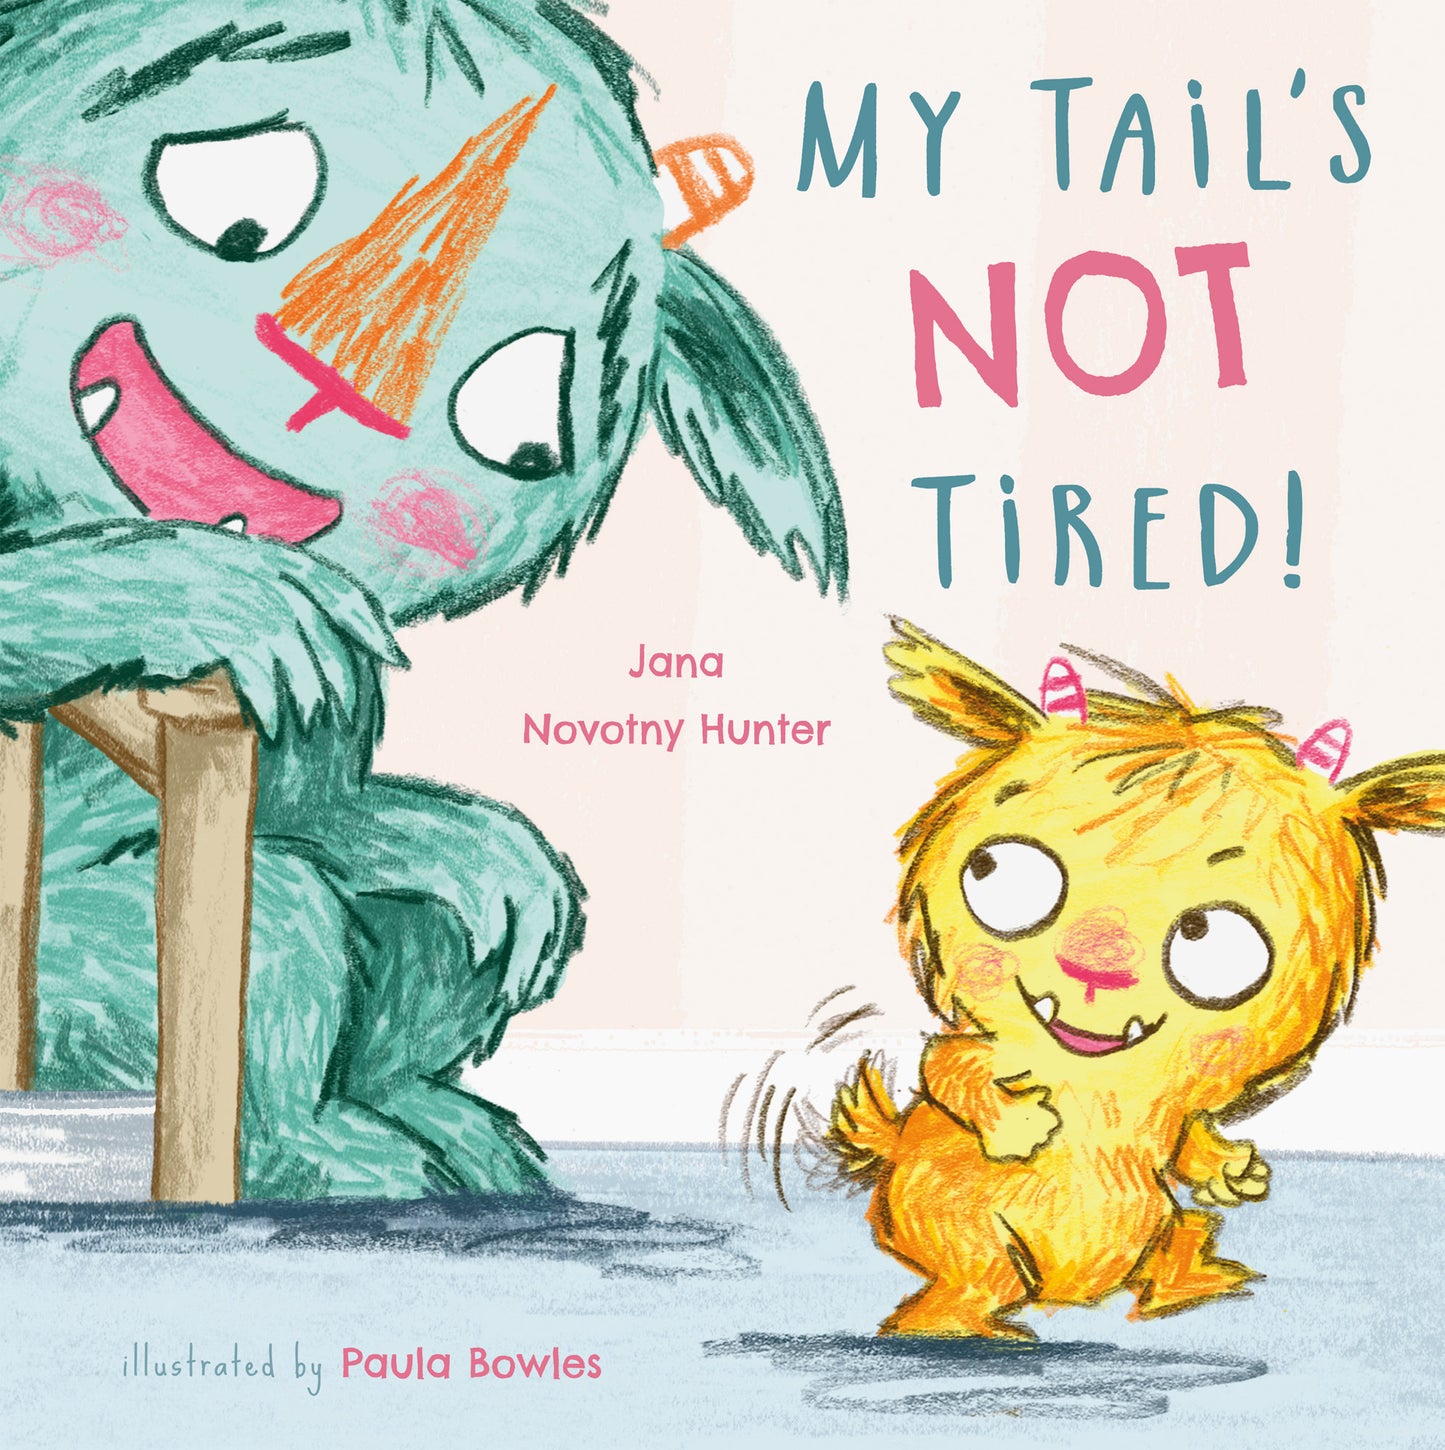 My Tail's Not Tired (Hardcover Edition)